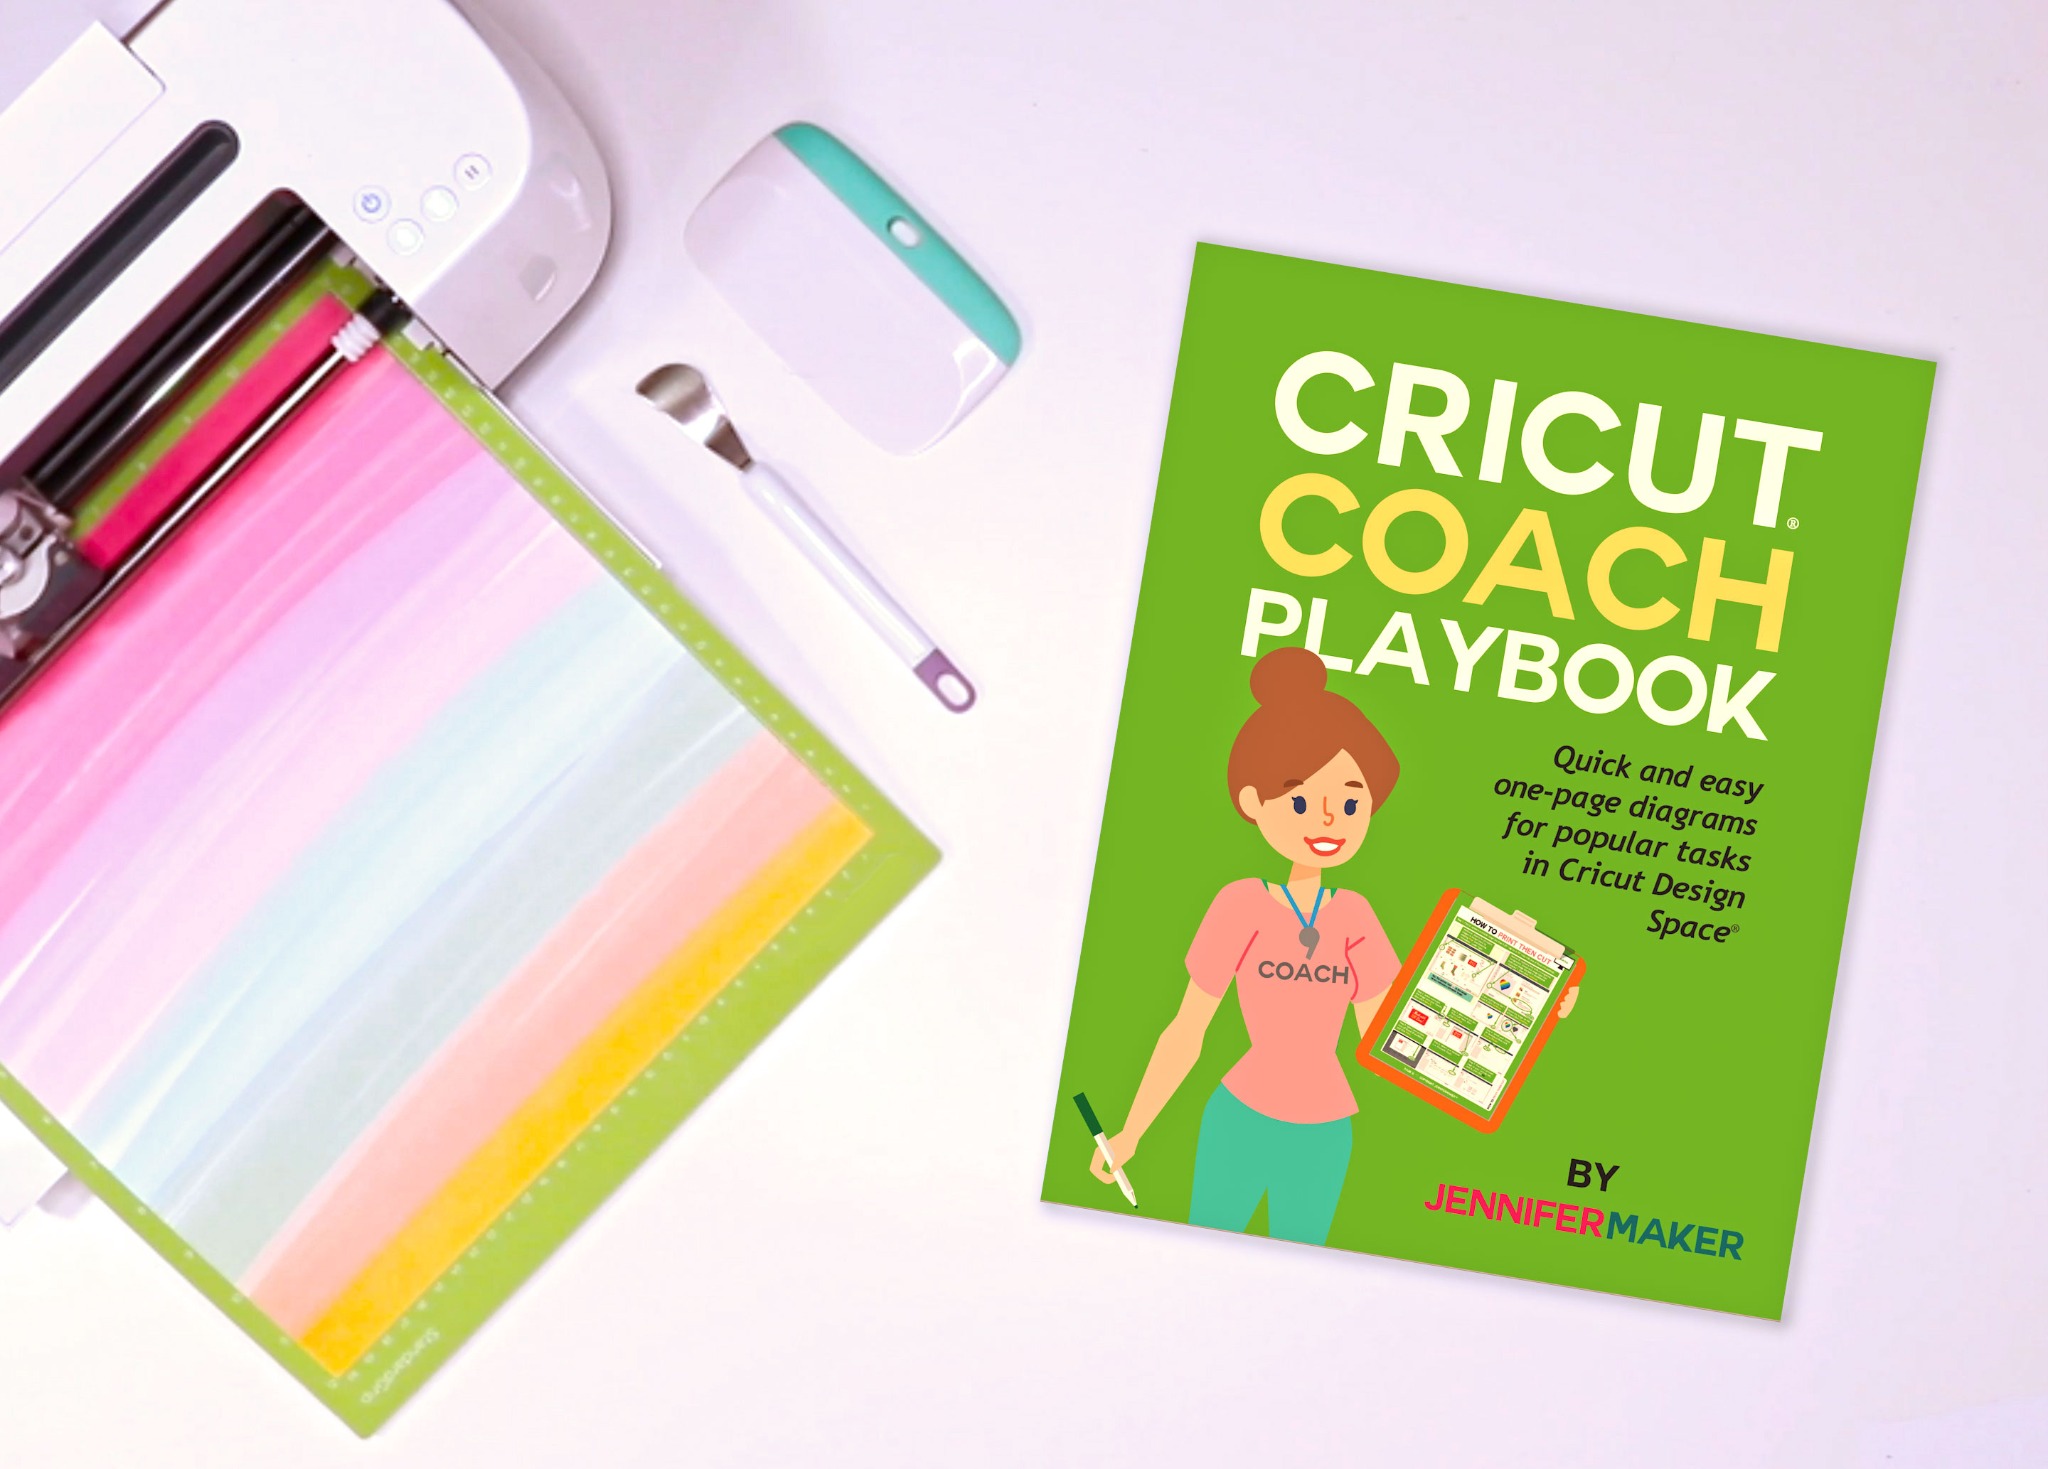  Cricut Coach Playbook: Quick And Easy One-Page